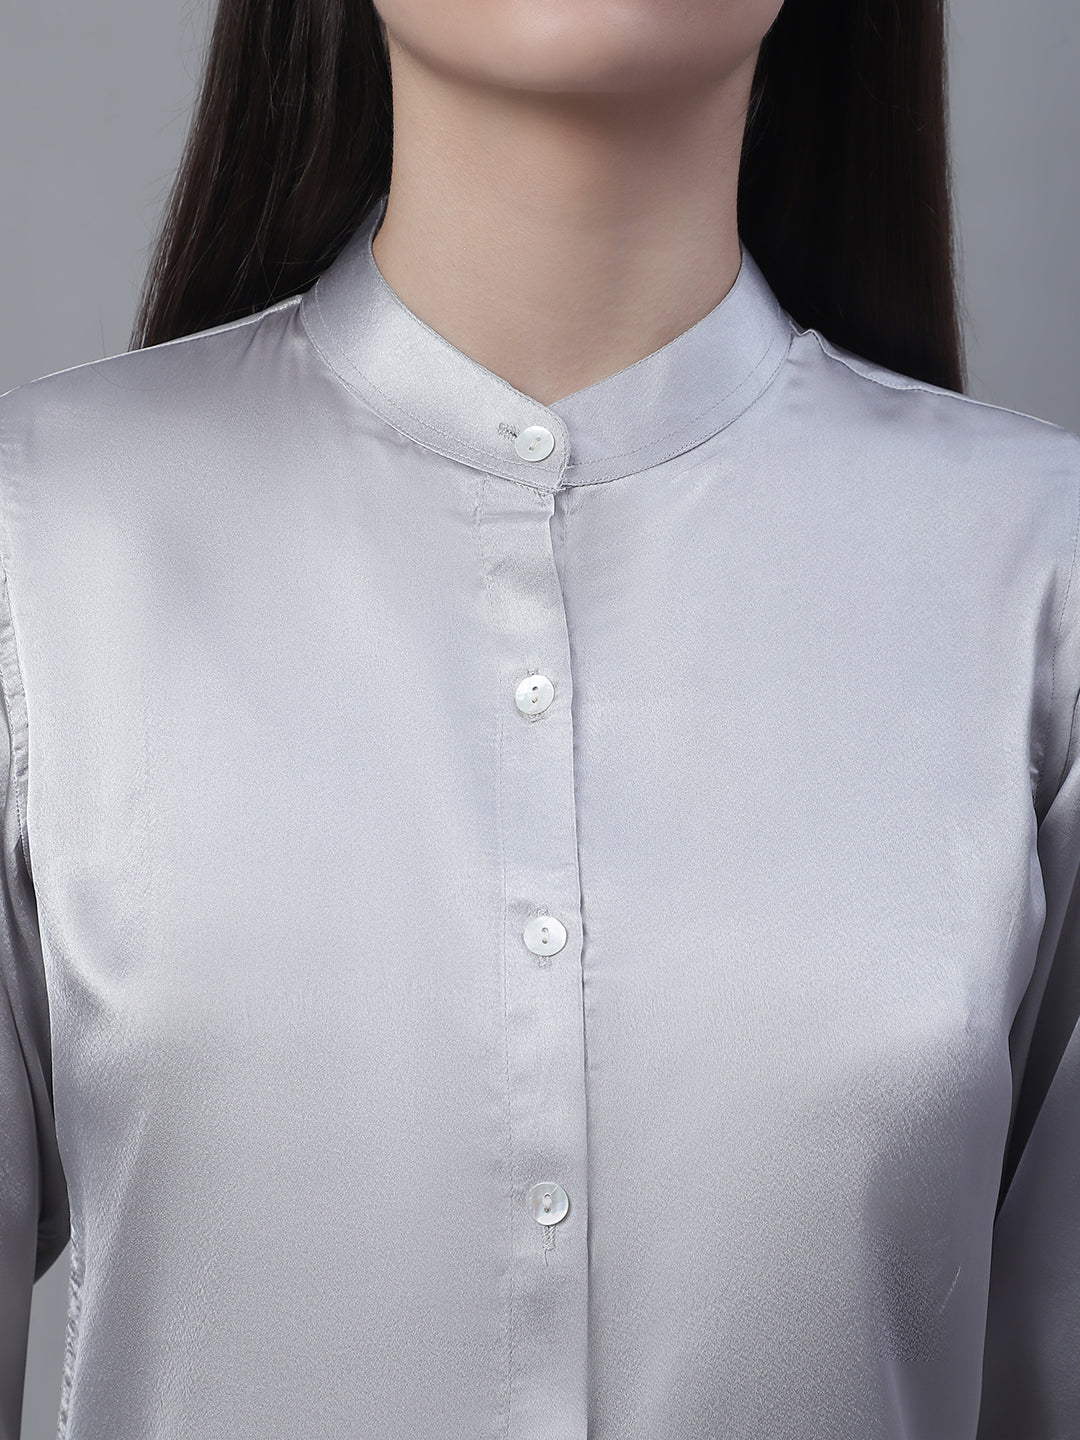 Women Grey Solid Shirt Style Top